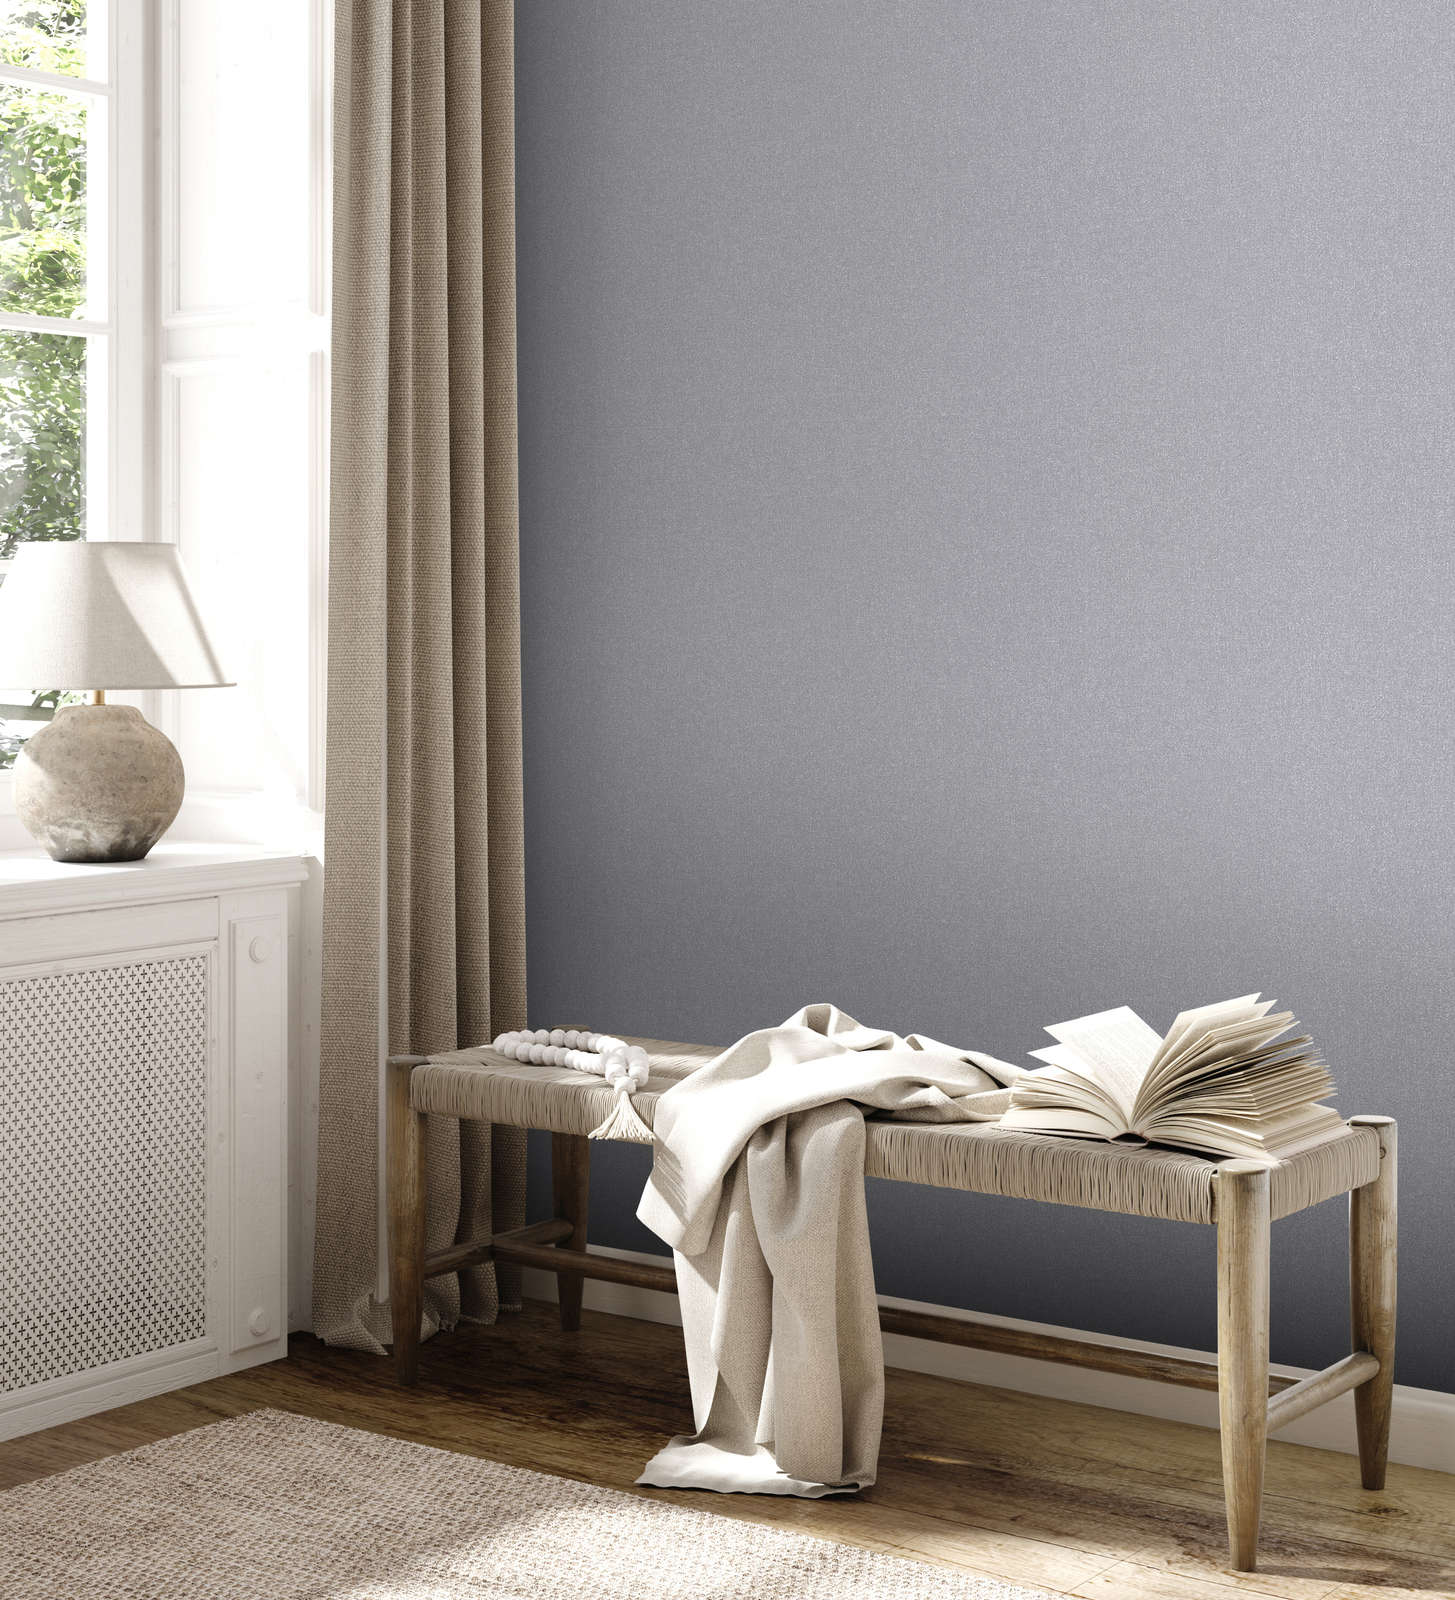             Non-woven wallpaper plains with fine structure - grey
        